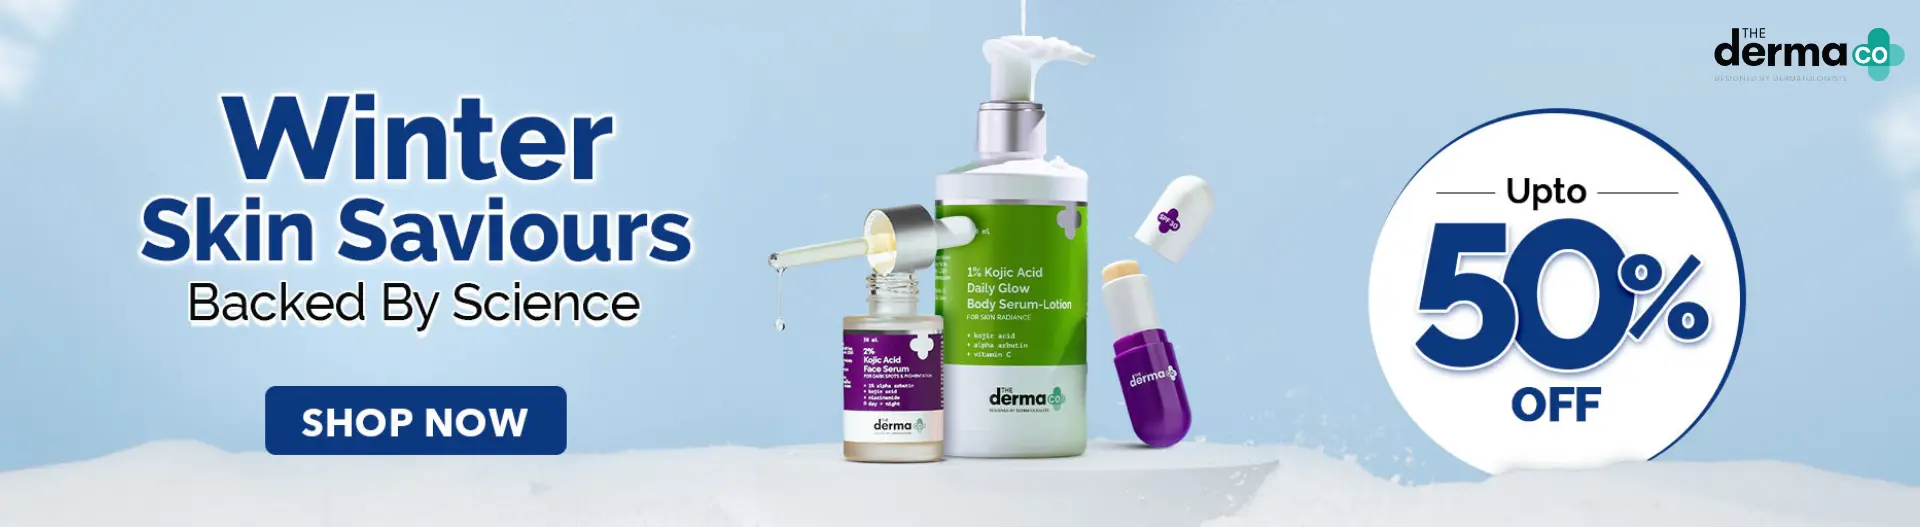 The Derma Co Banner